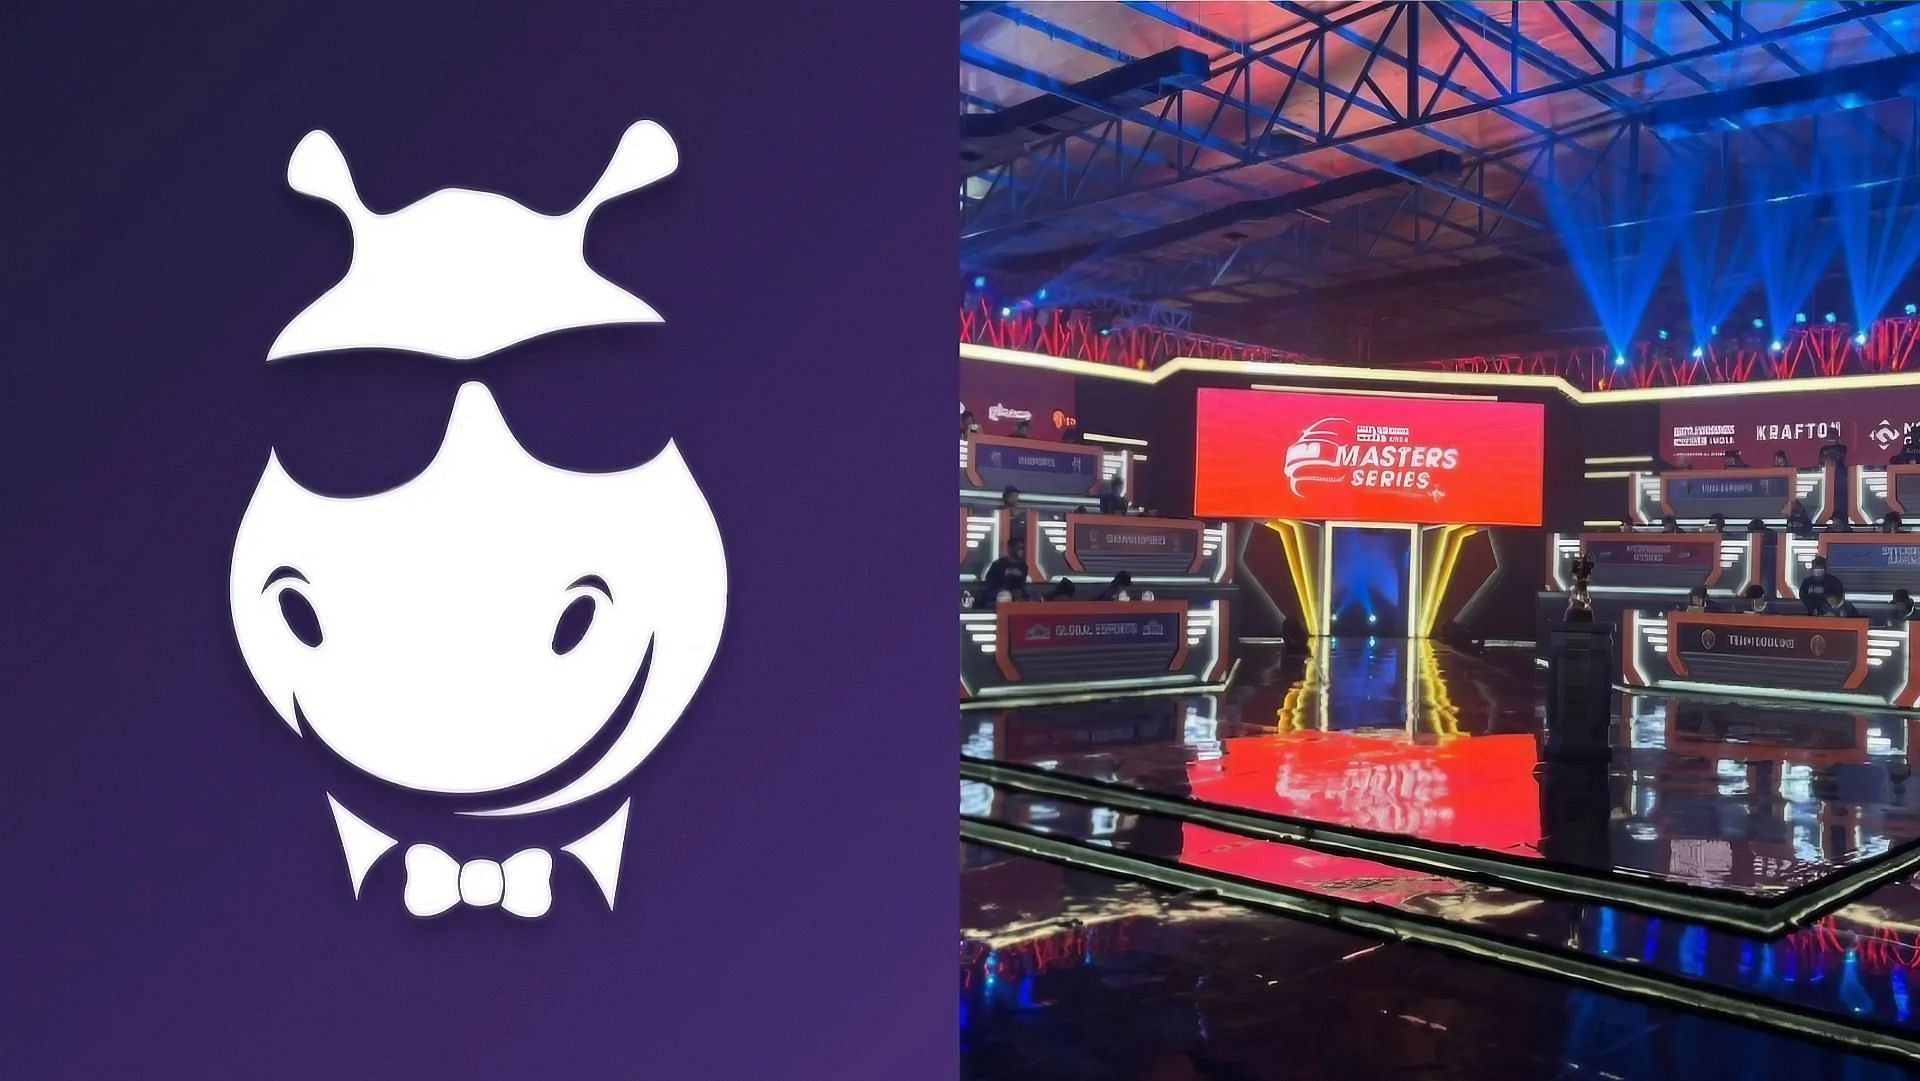 Loco has been pivotal in popularizing esports in the country (Images via Loco, Krafton)